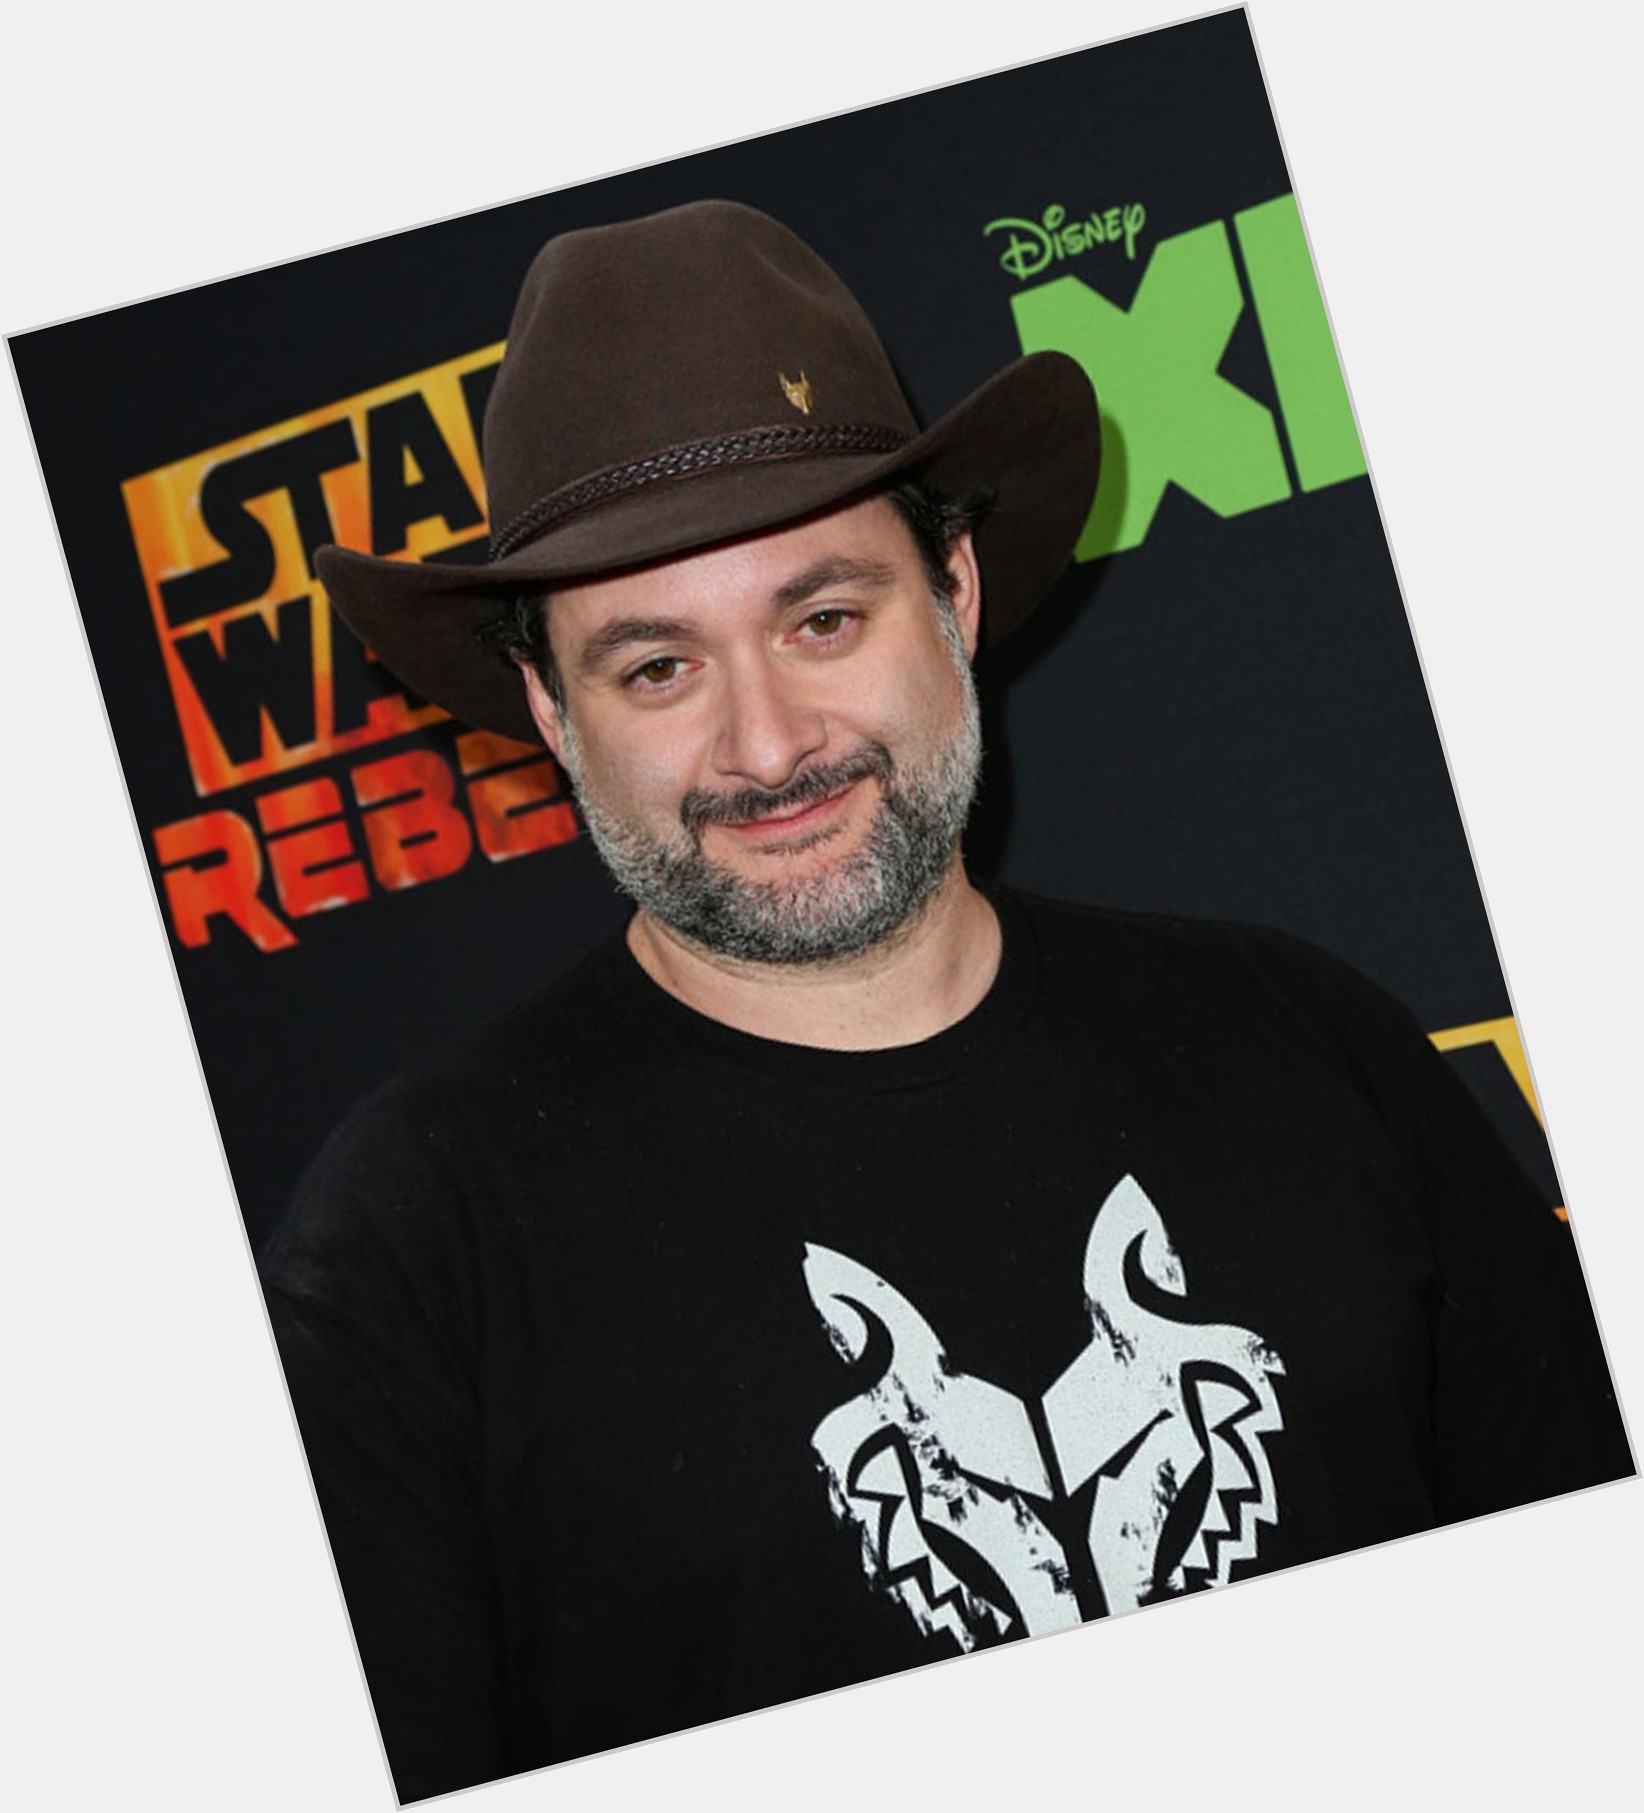 Dave Filoni hairstyle 2